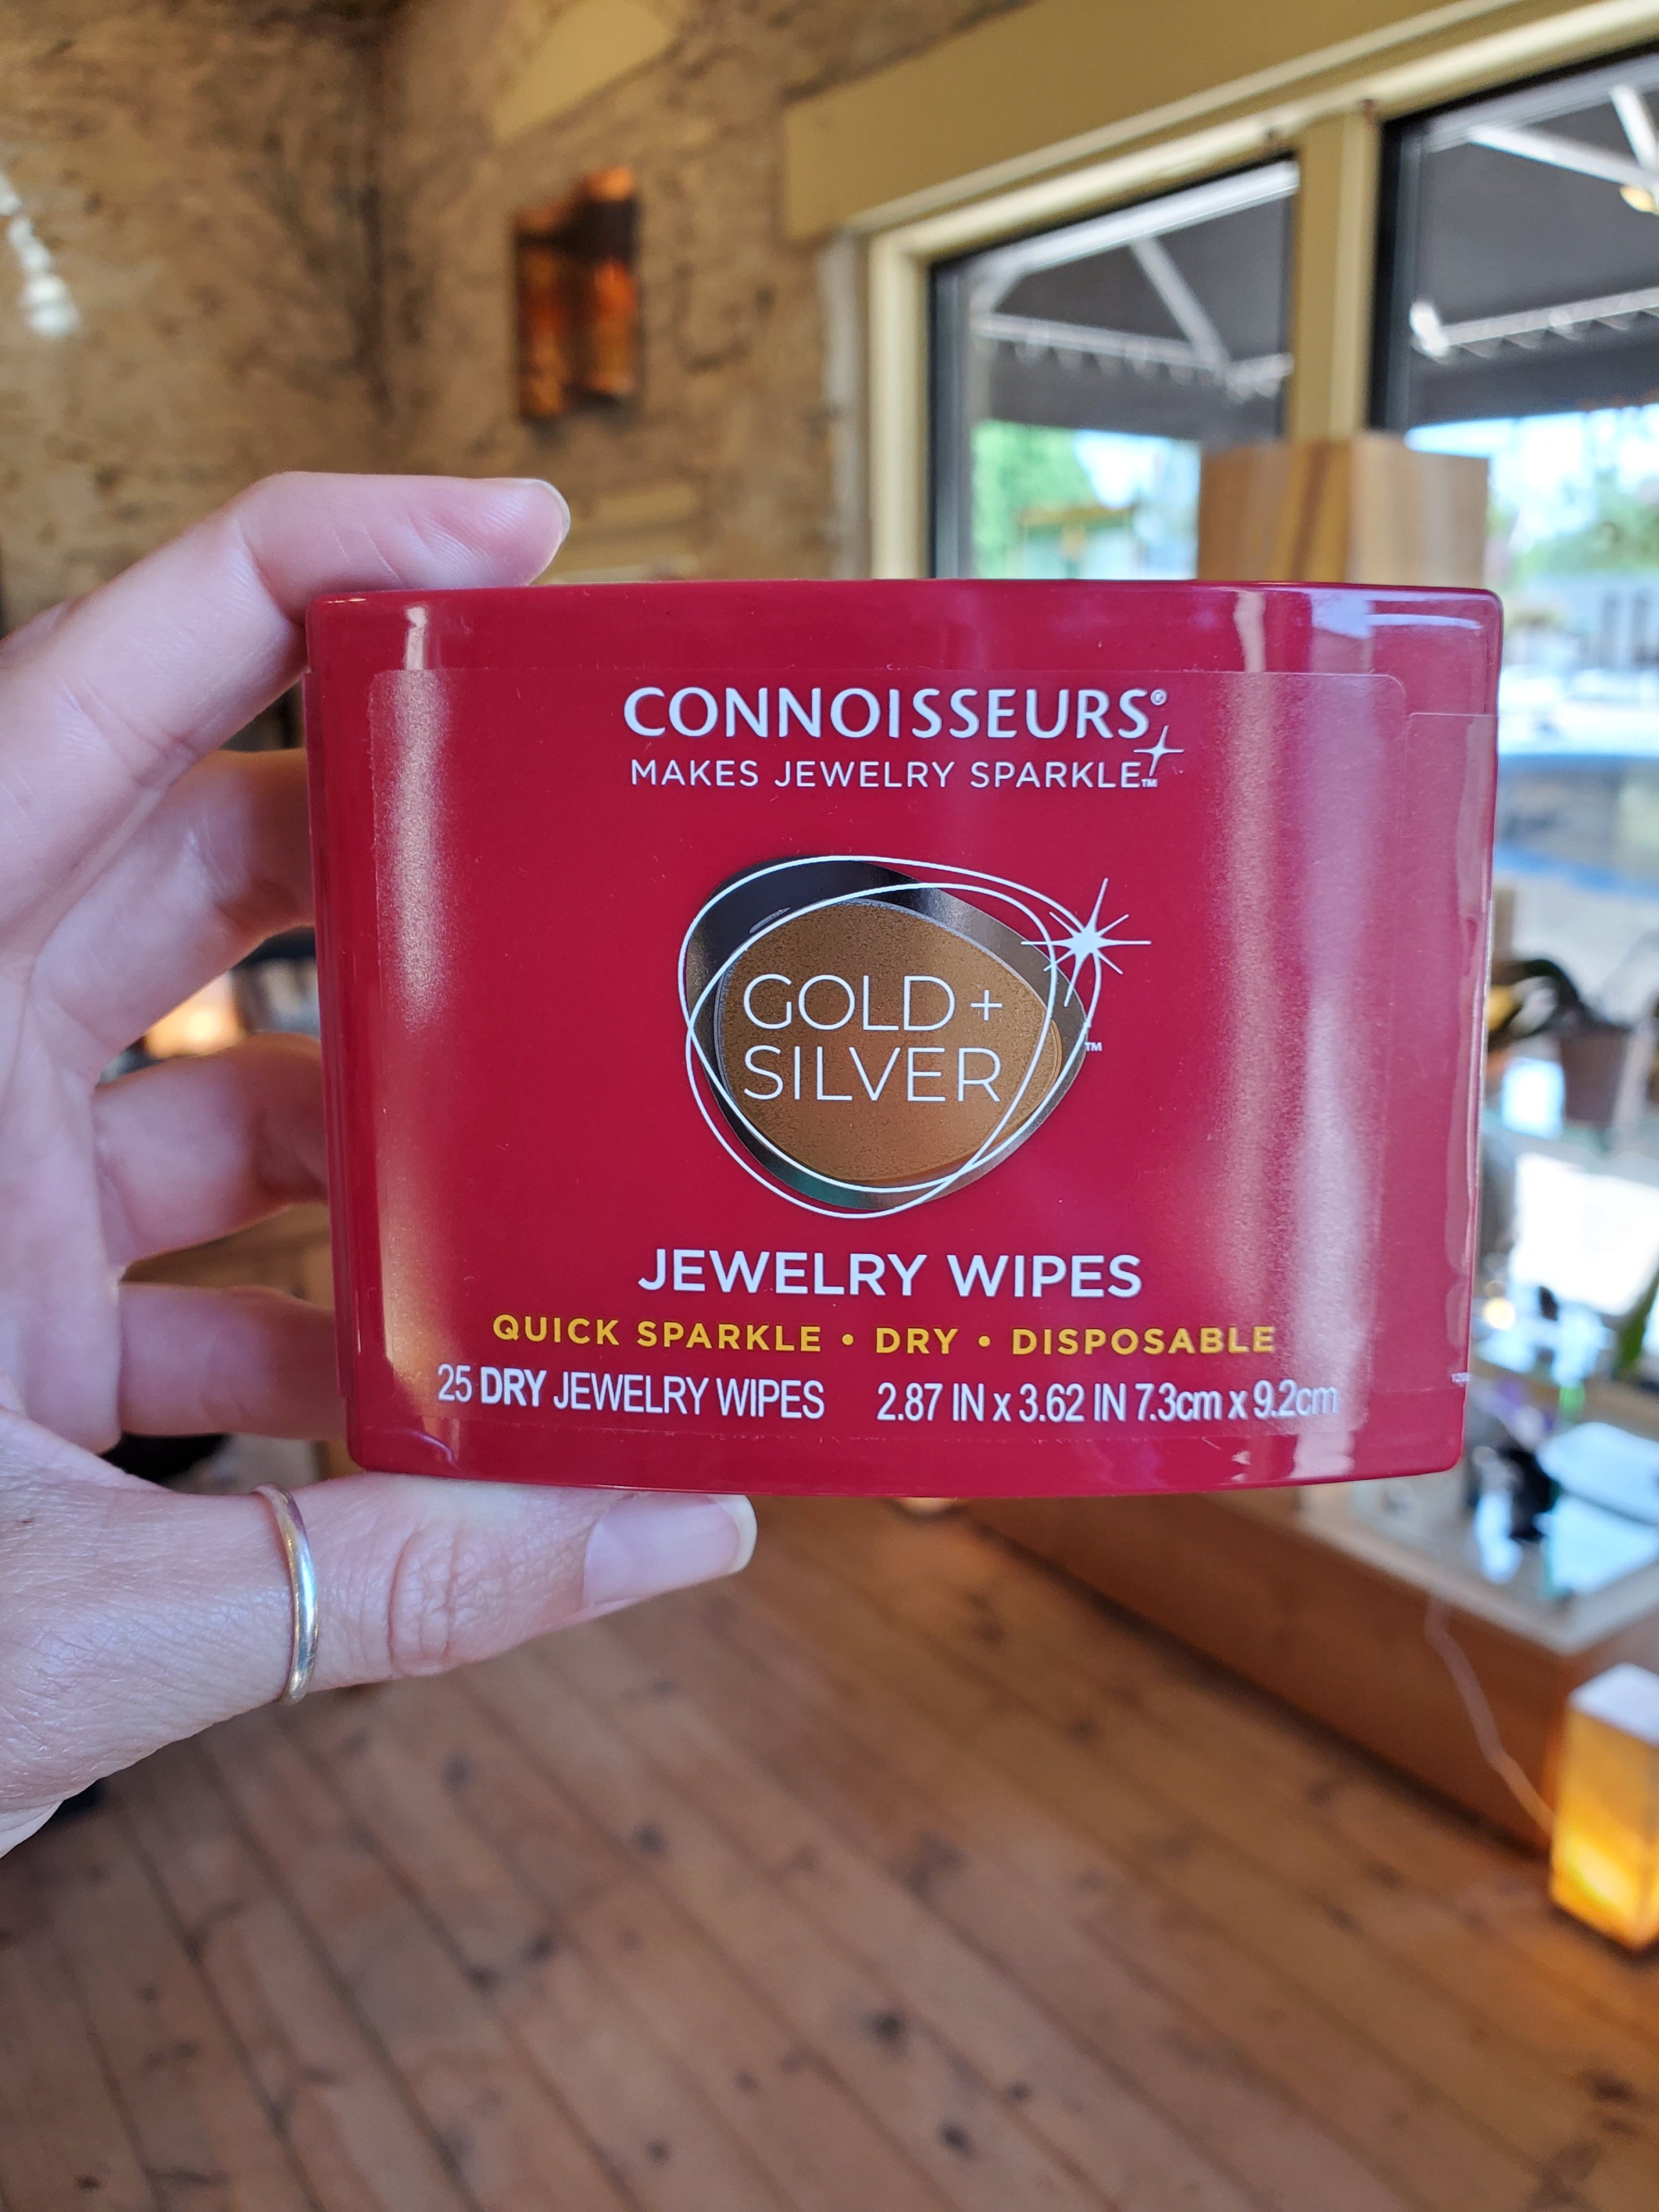 Jewelry Cleaning Wipes